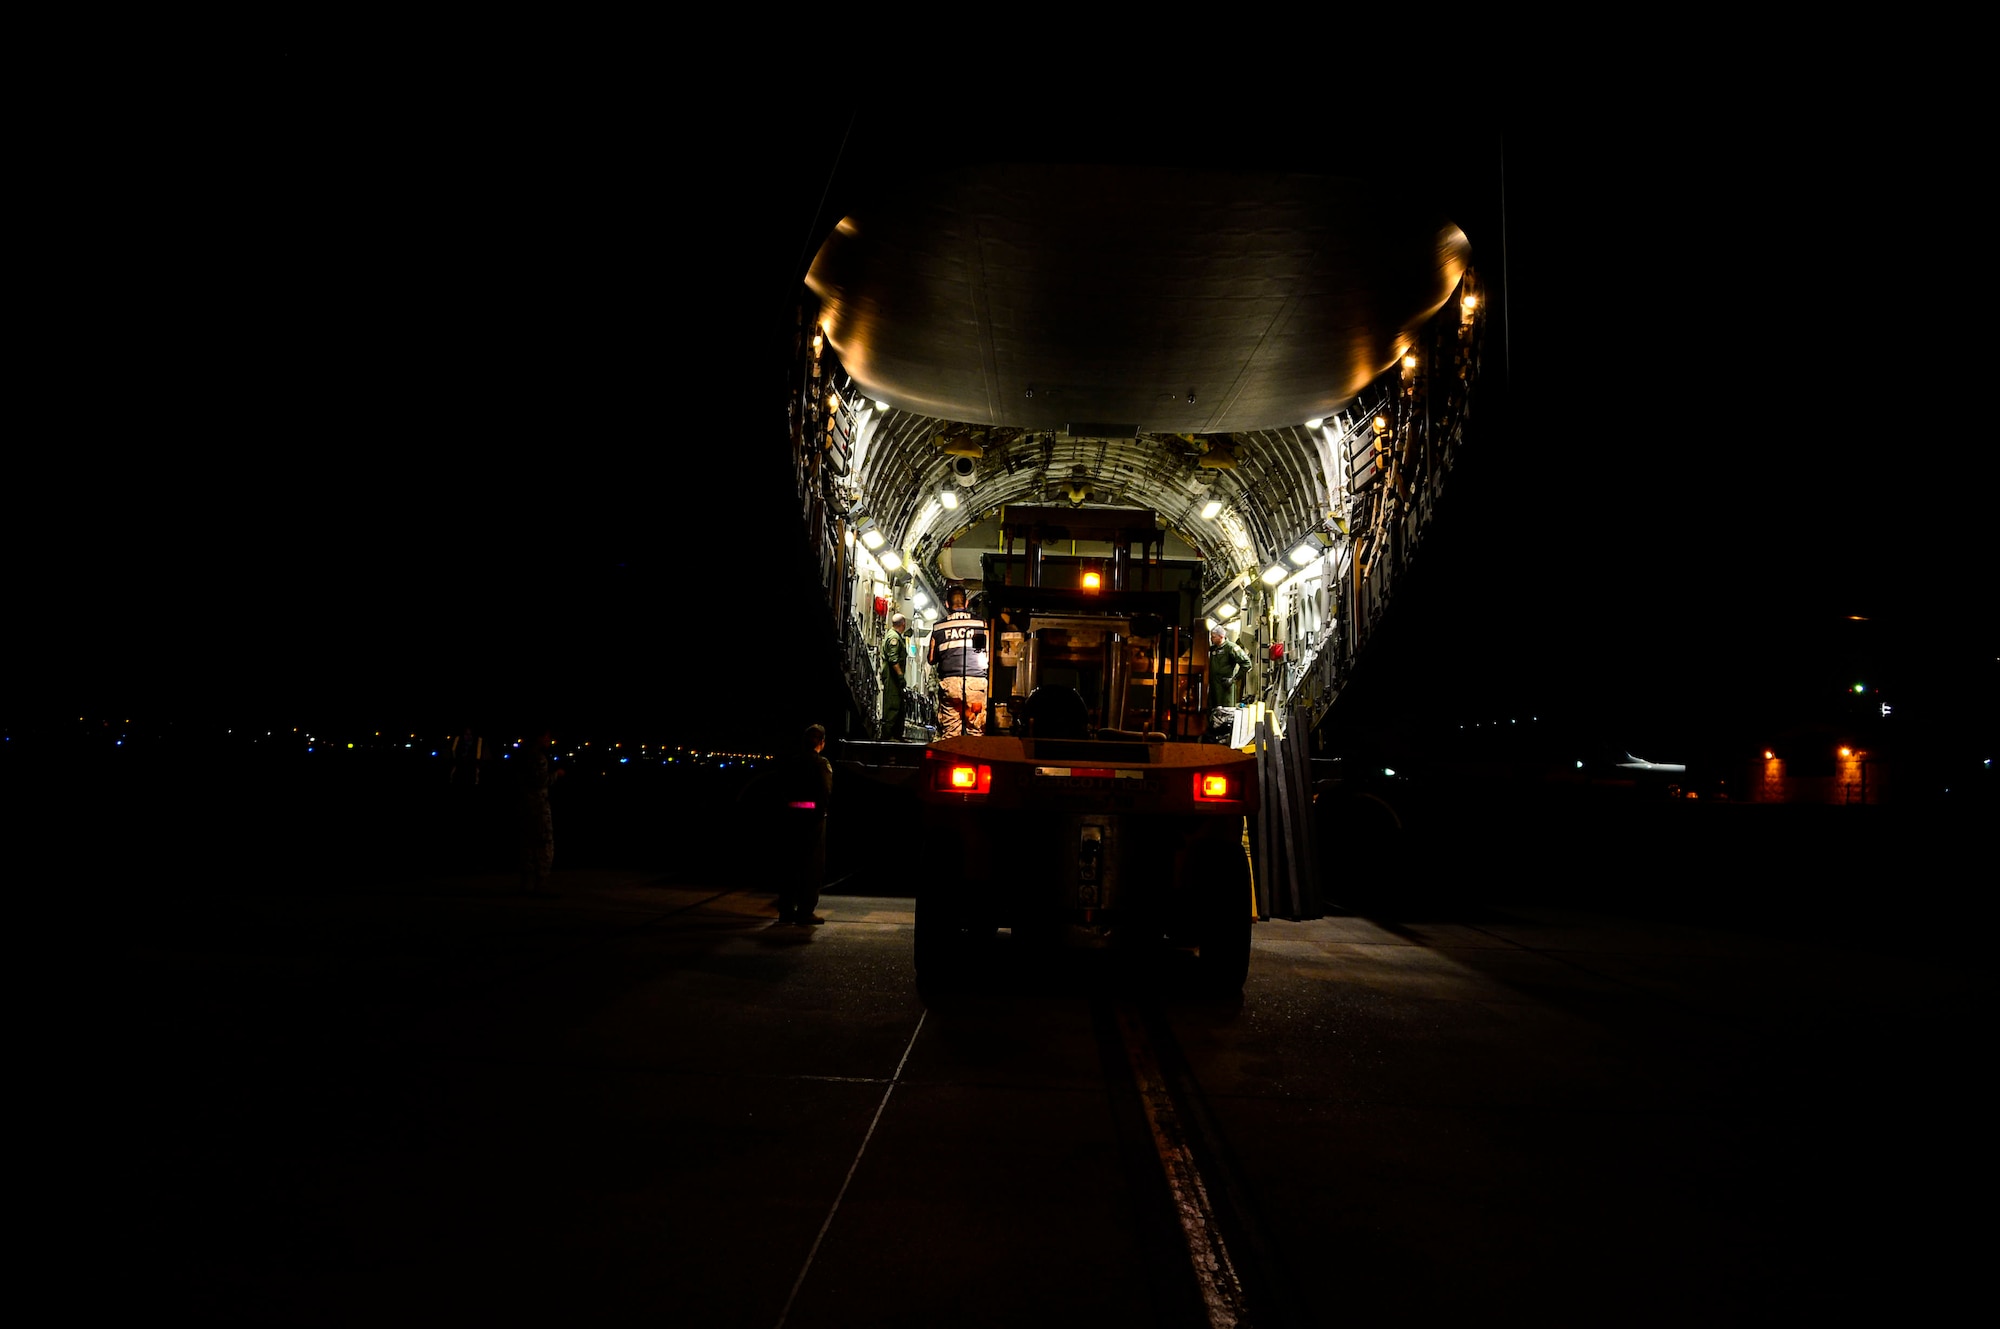 U.S. Airmen, from Wright-Patterson AFB, Ohio, work with Chilean airmen to unload a C-17 Globemaster III in Santiago, Chile, for the 2016 International Air and Space Fair (FIDAE), March 27, 2016.  Airmen from around the U.S. are scheduled to participate in a variety of activities during the week-long air show that includes aerial demonstrations, interaction with the local community, and subject matter expert exchanges with the Chilean air force. (U.S. Air Force photo by Tech. Sgt. Heather Redman/Released)